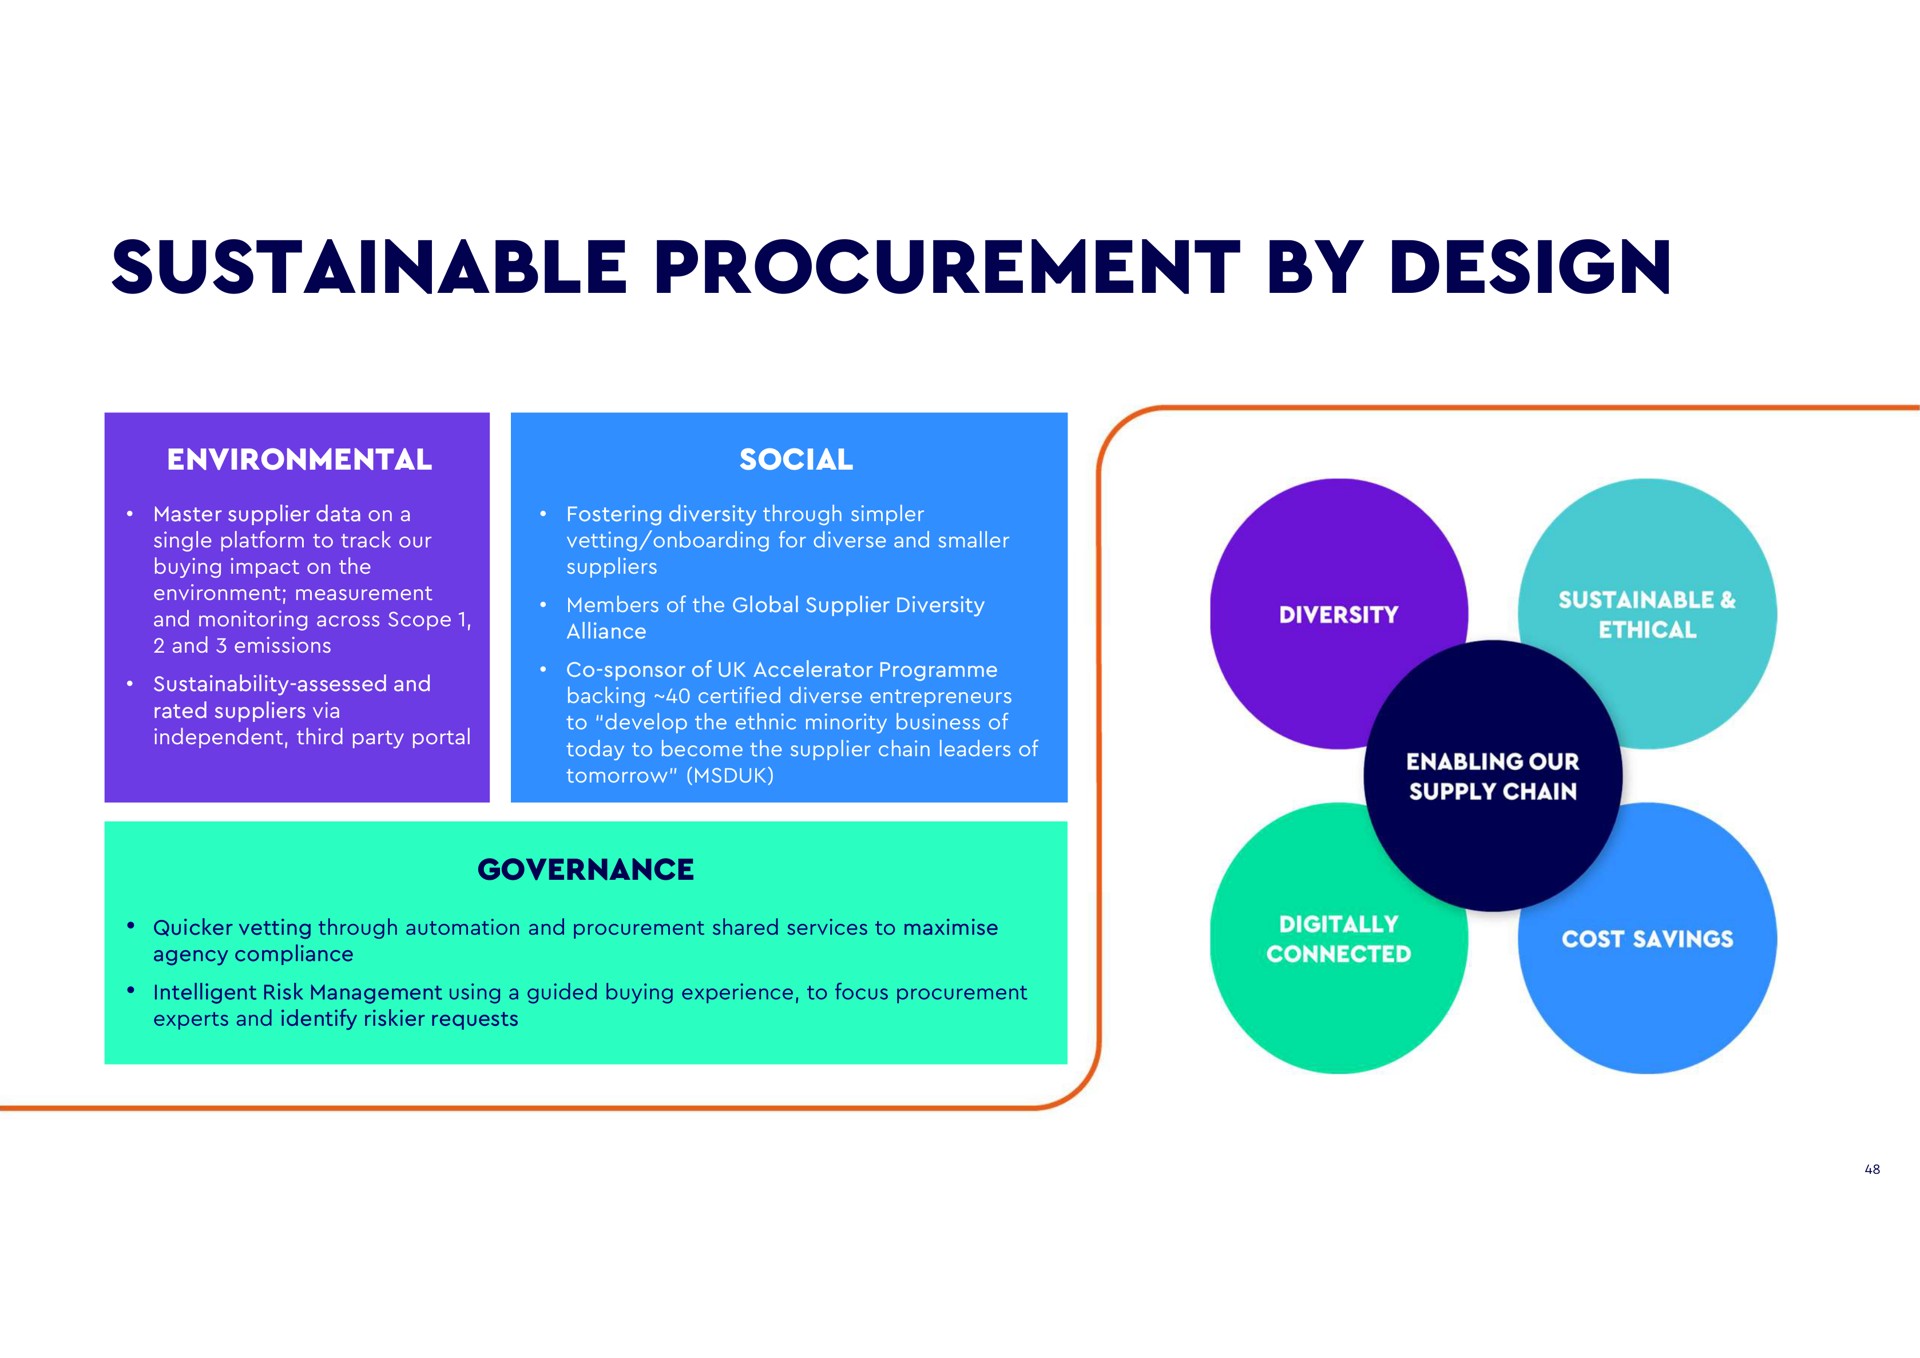 sustainable procurement by design environmental social master supplier data on a single platform to track our buying impact on the environment measurement and monitoring across scope and emissions assessed and rated suppliers via independent third party portal fostering diversity through simpler vetting for diverse and smaller suppliers members of the global supplier diversity alliance sponsor of accelerator backing certified diverse entrepreneurs to develop the ethnic minority business of today to become the supplier chain leaders of tomorrow governance vetting through and shared services to agency compliance intelligent risk management using a guided buying experience to focus experts and identify requests diversity ethical enabling our supply chain digitally connected cost savings | WPP